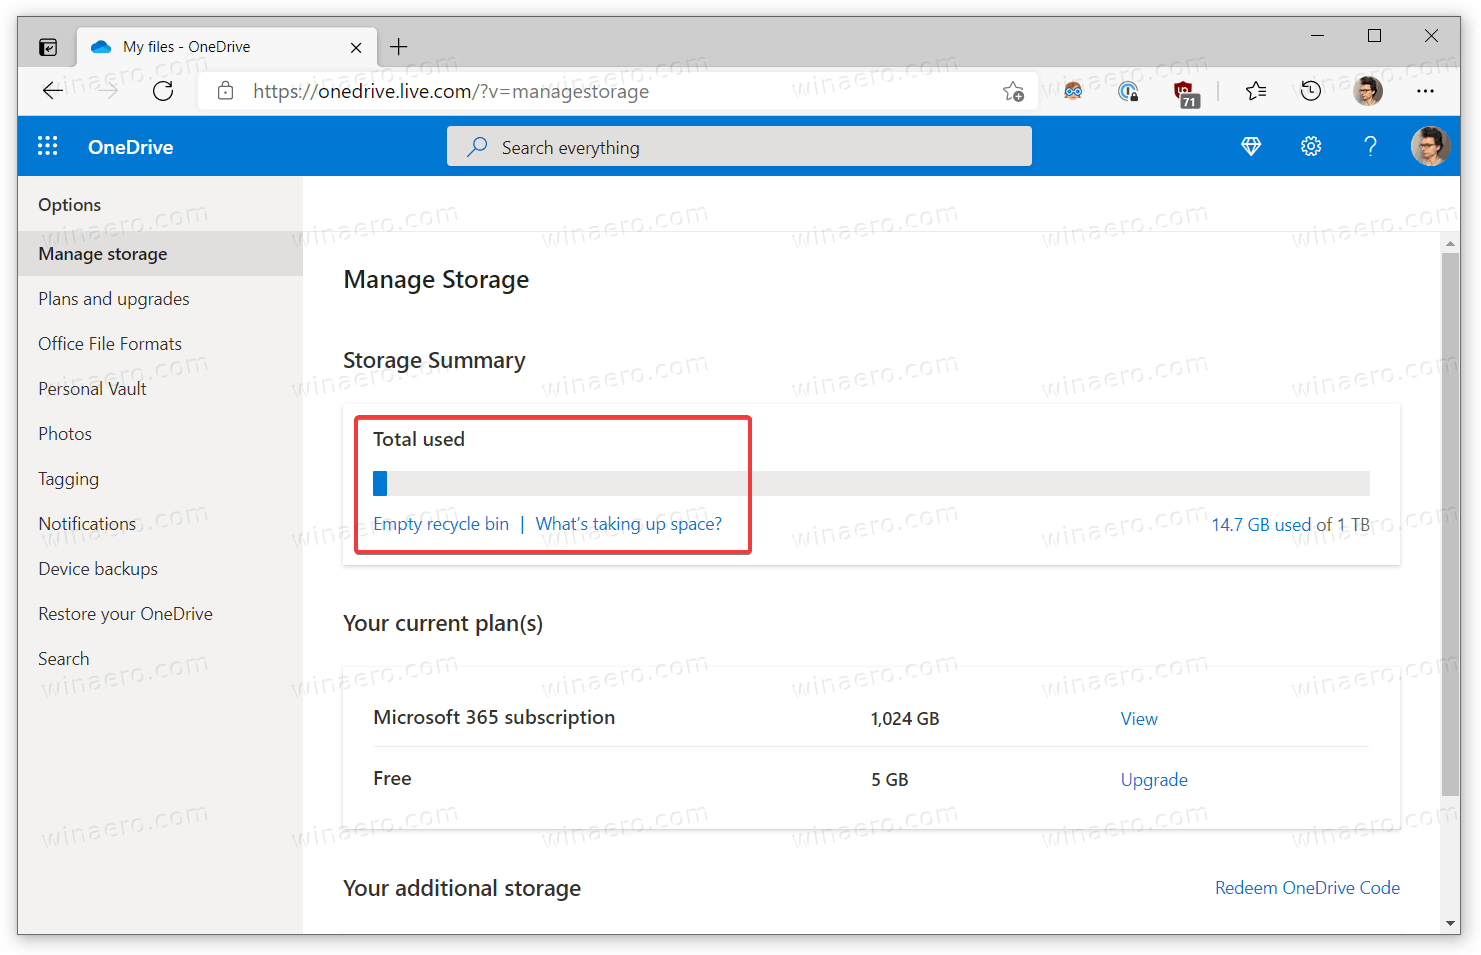 What's taking up space in OneDrive